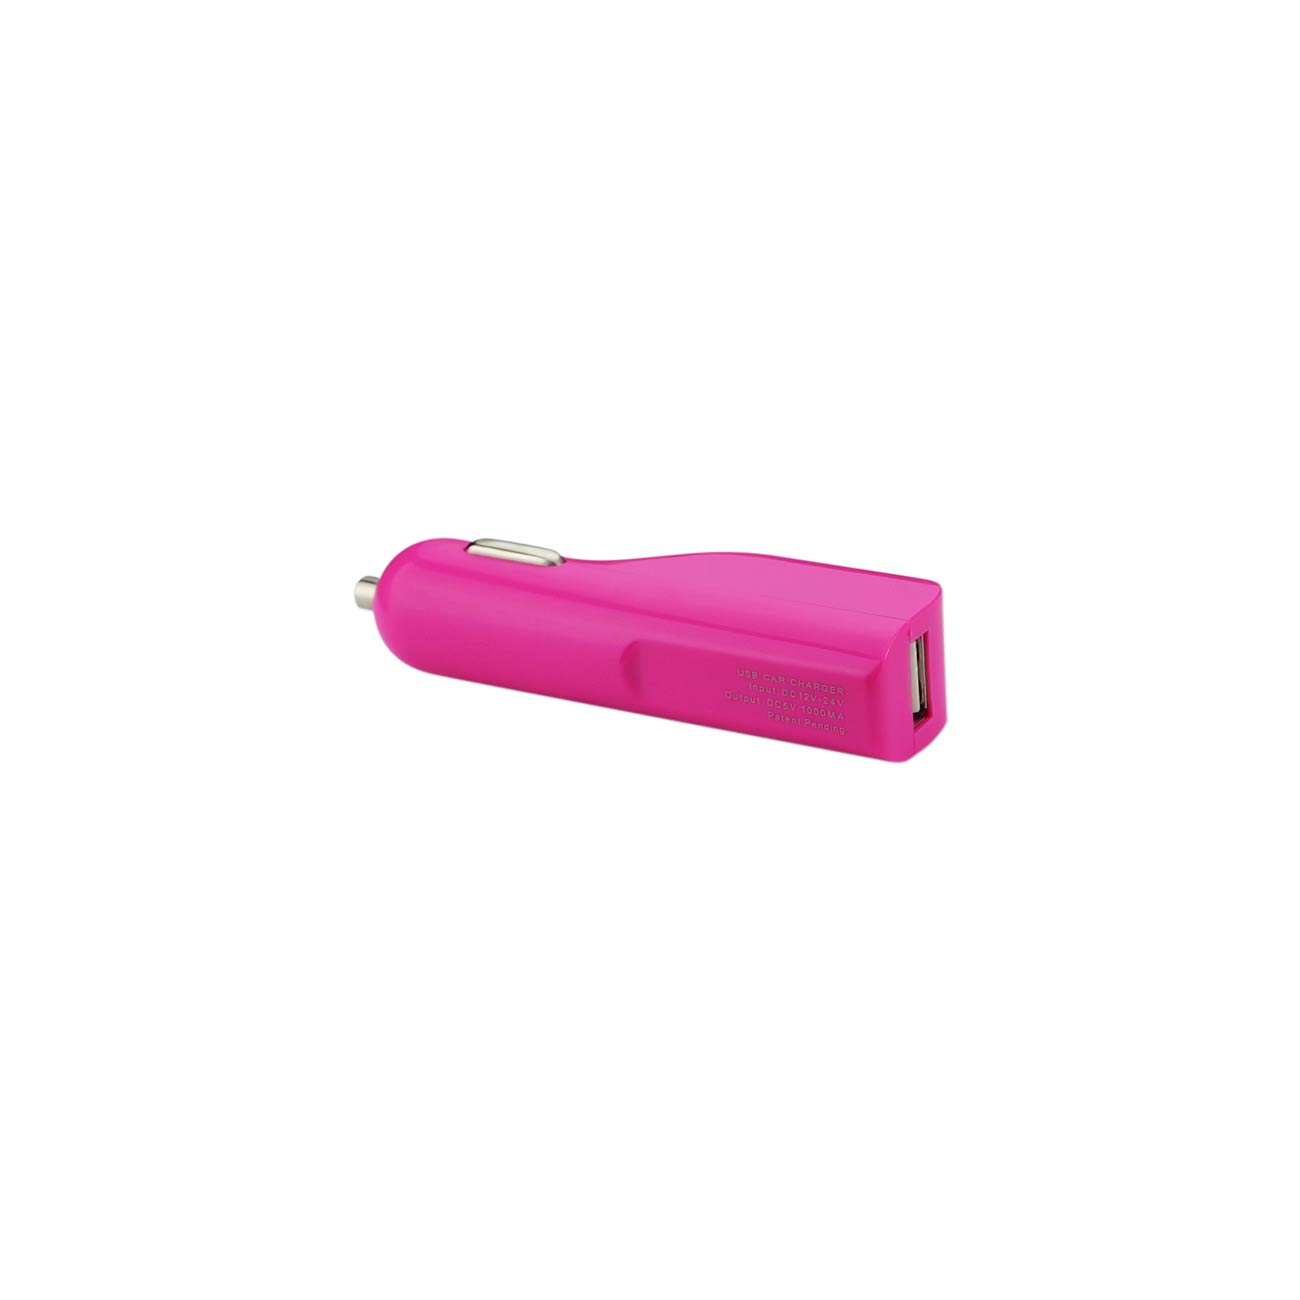 Micro USB 1 AMP Car Charger In Hot Pink